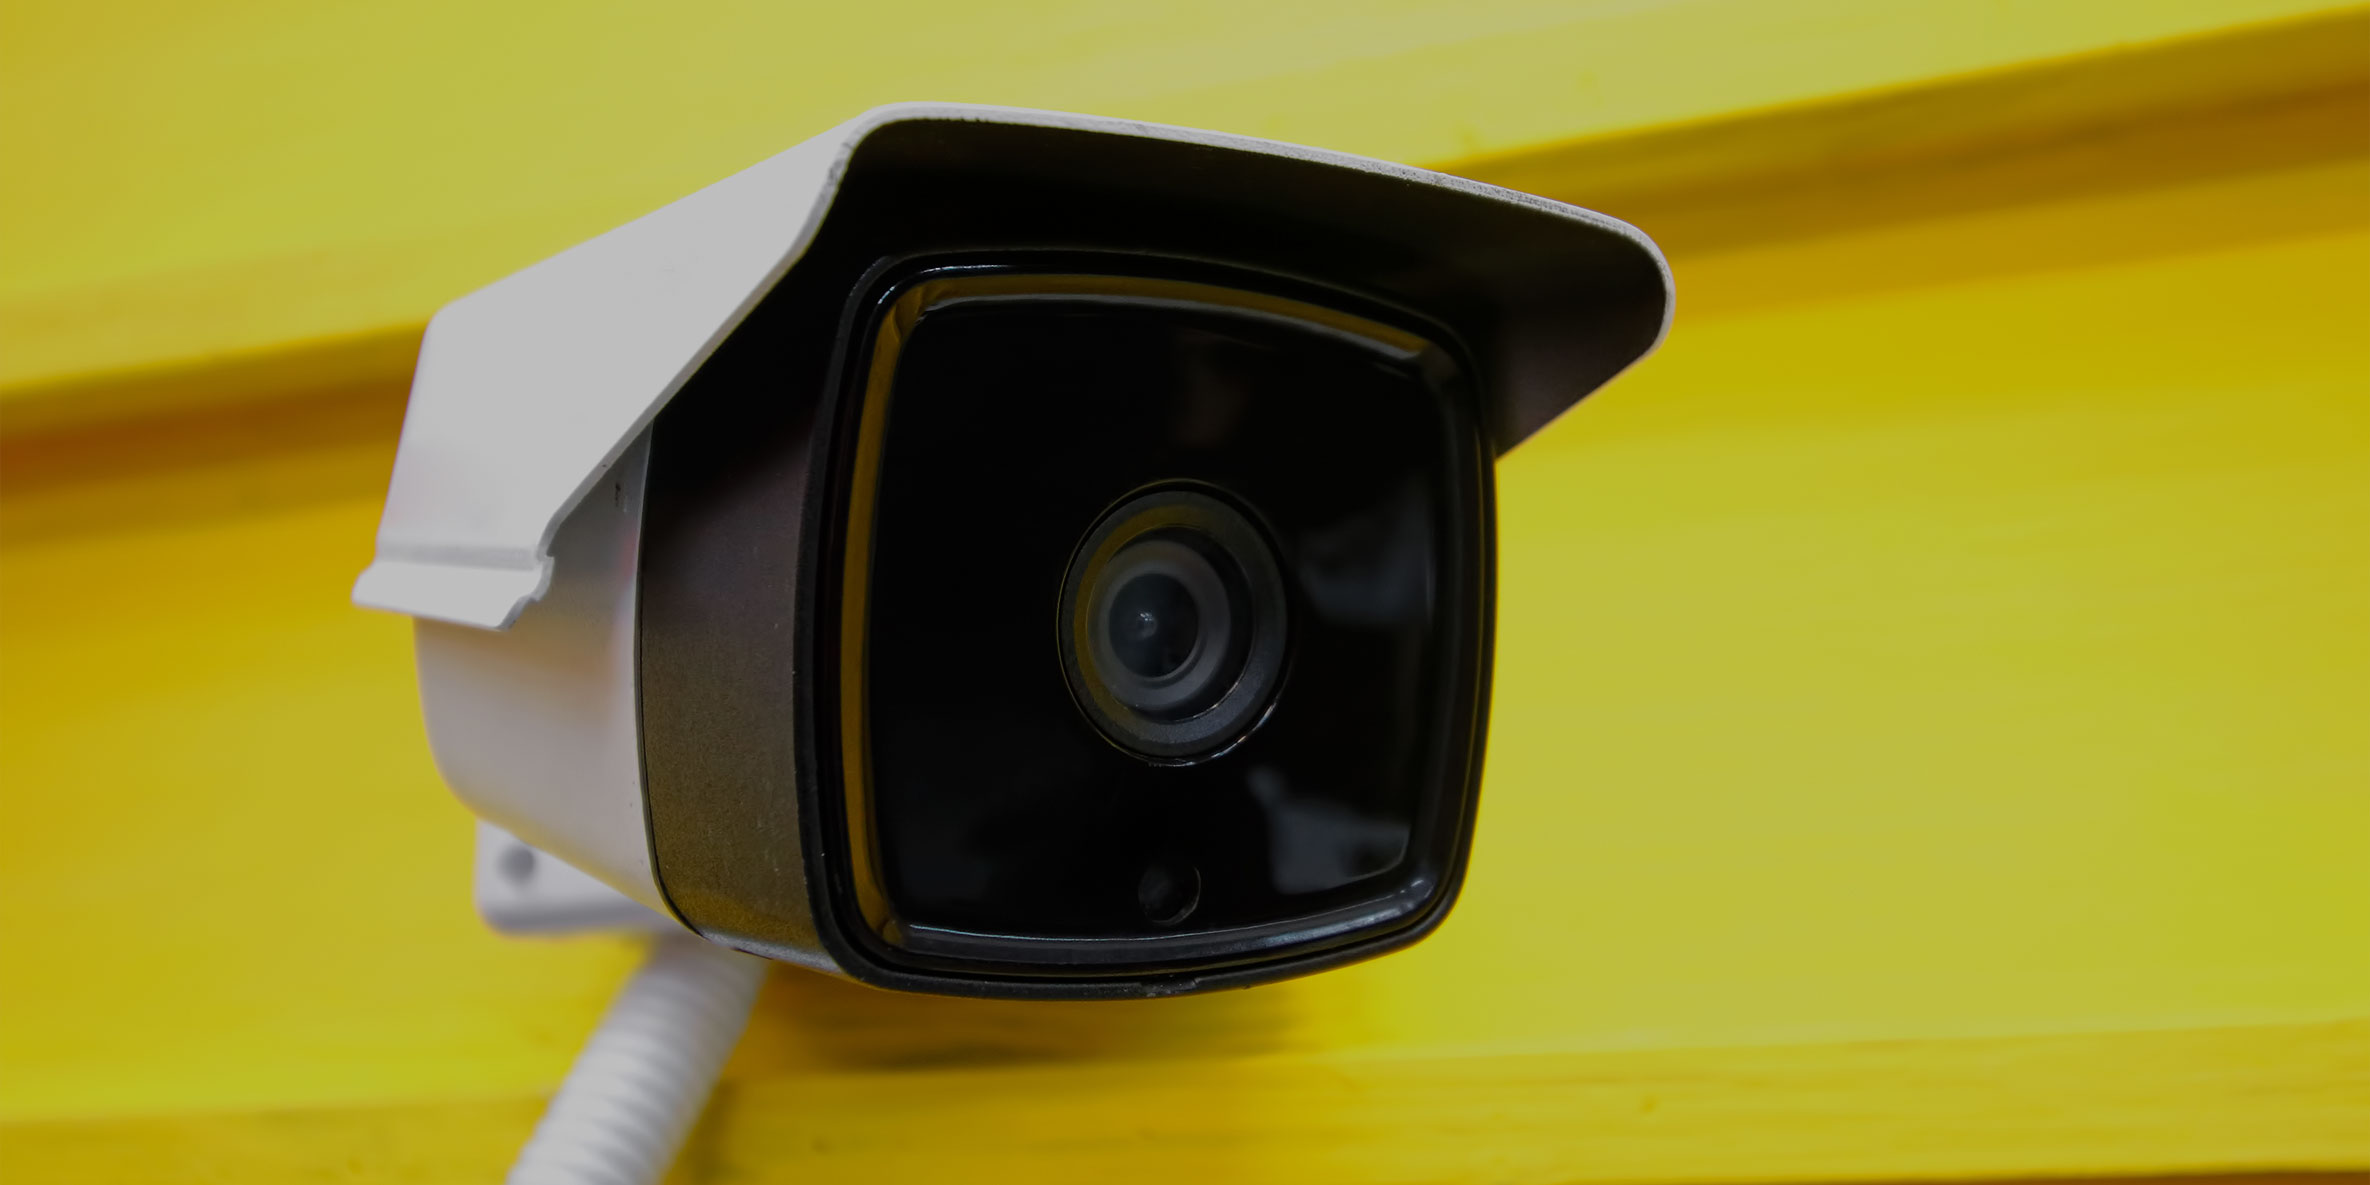 Home Security Cameras: Are They Worth It?